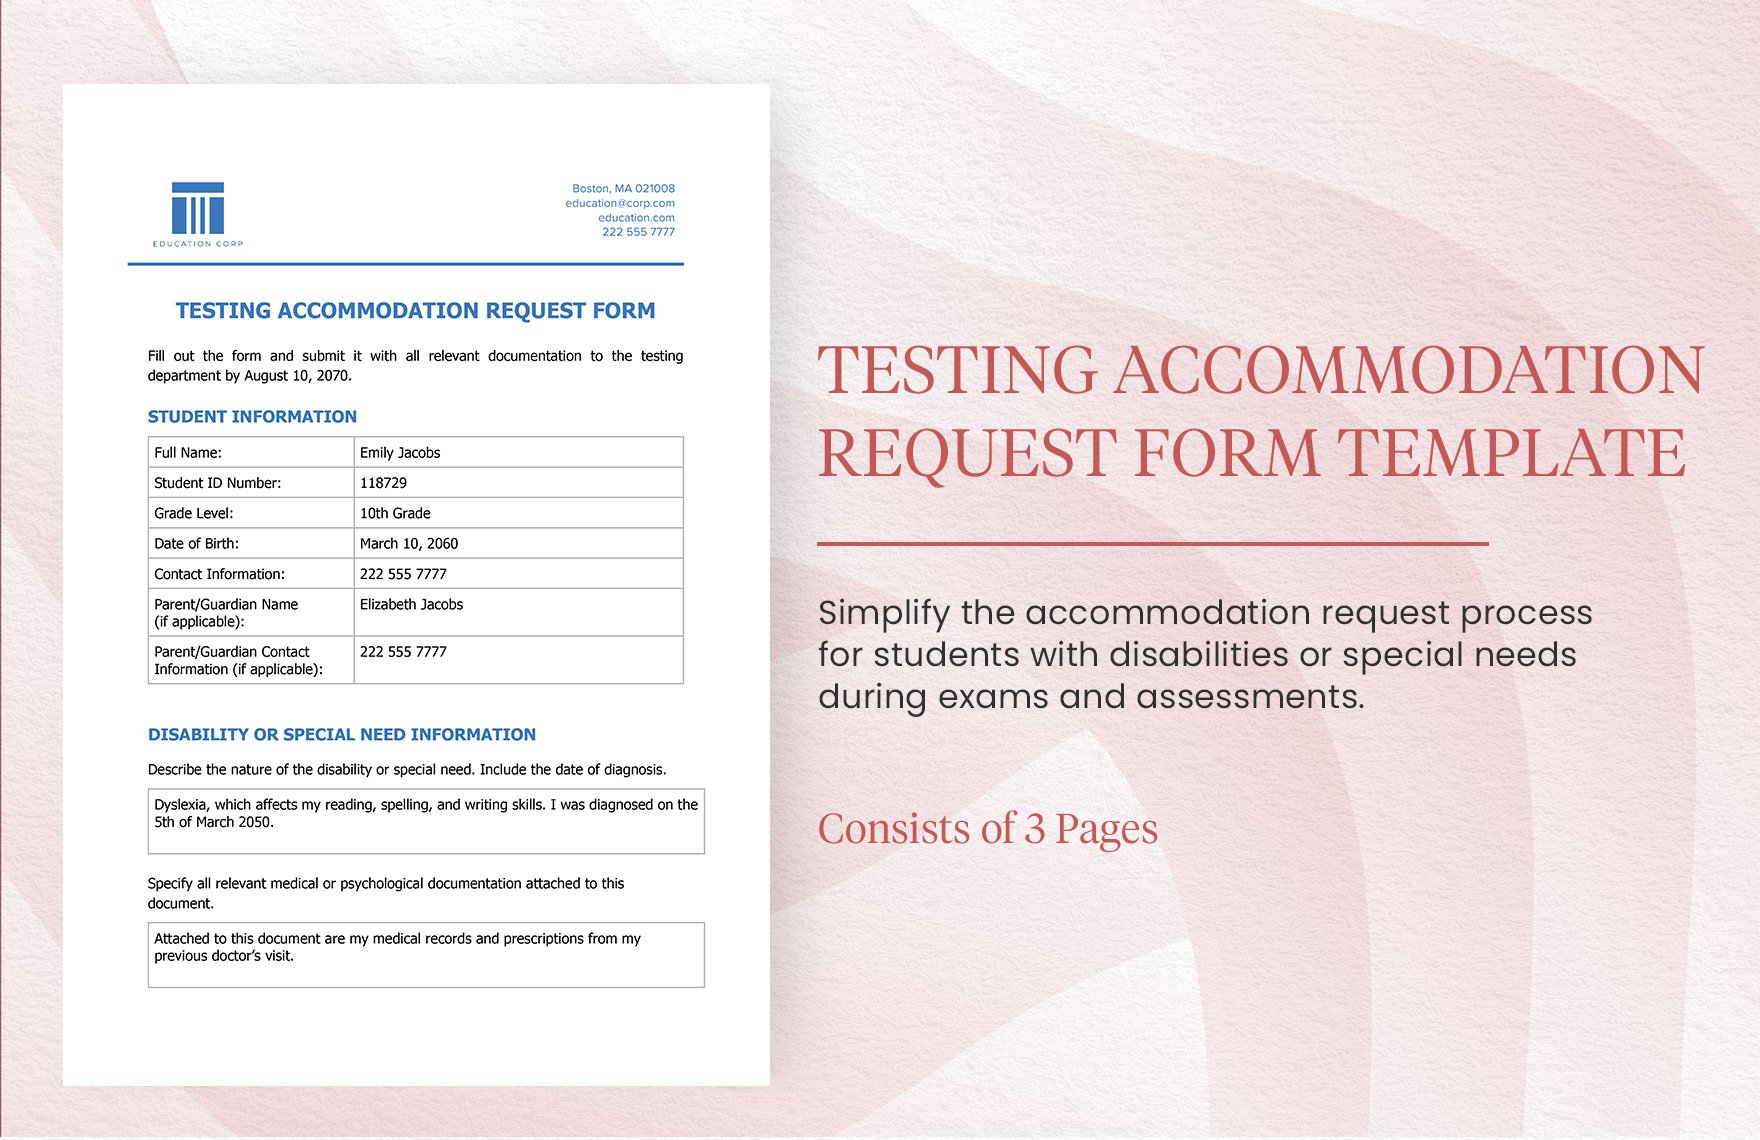 Testing Accommodation Request Form Template in Word, Google Docs, PDF